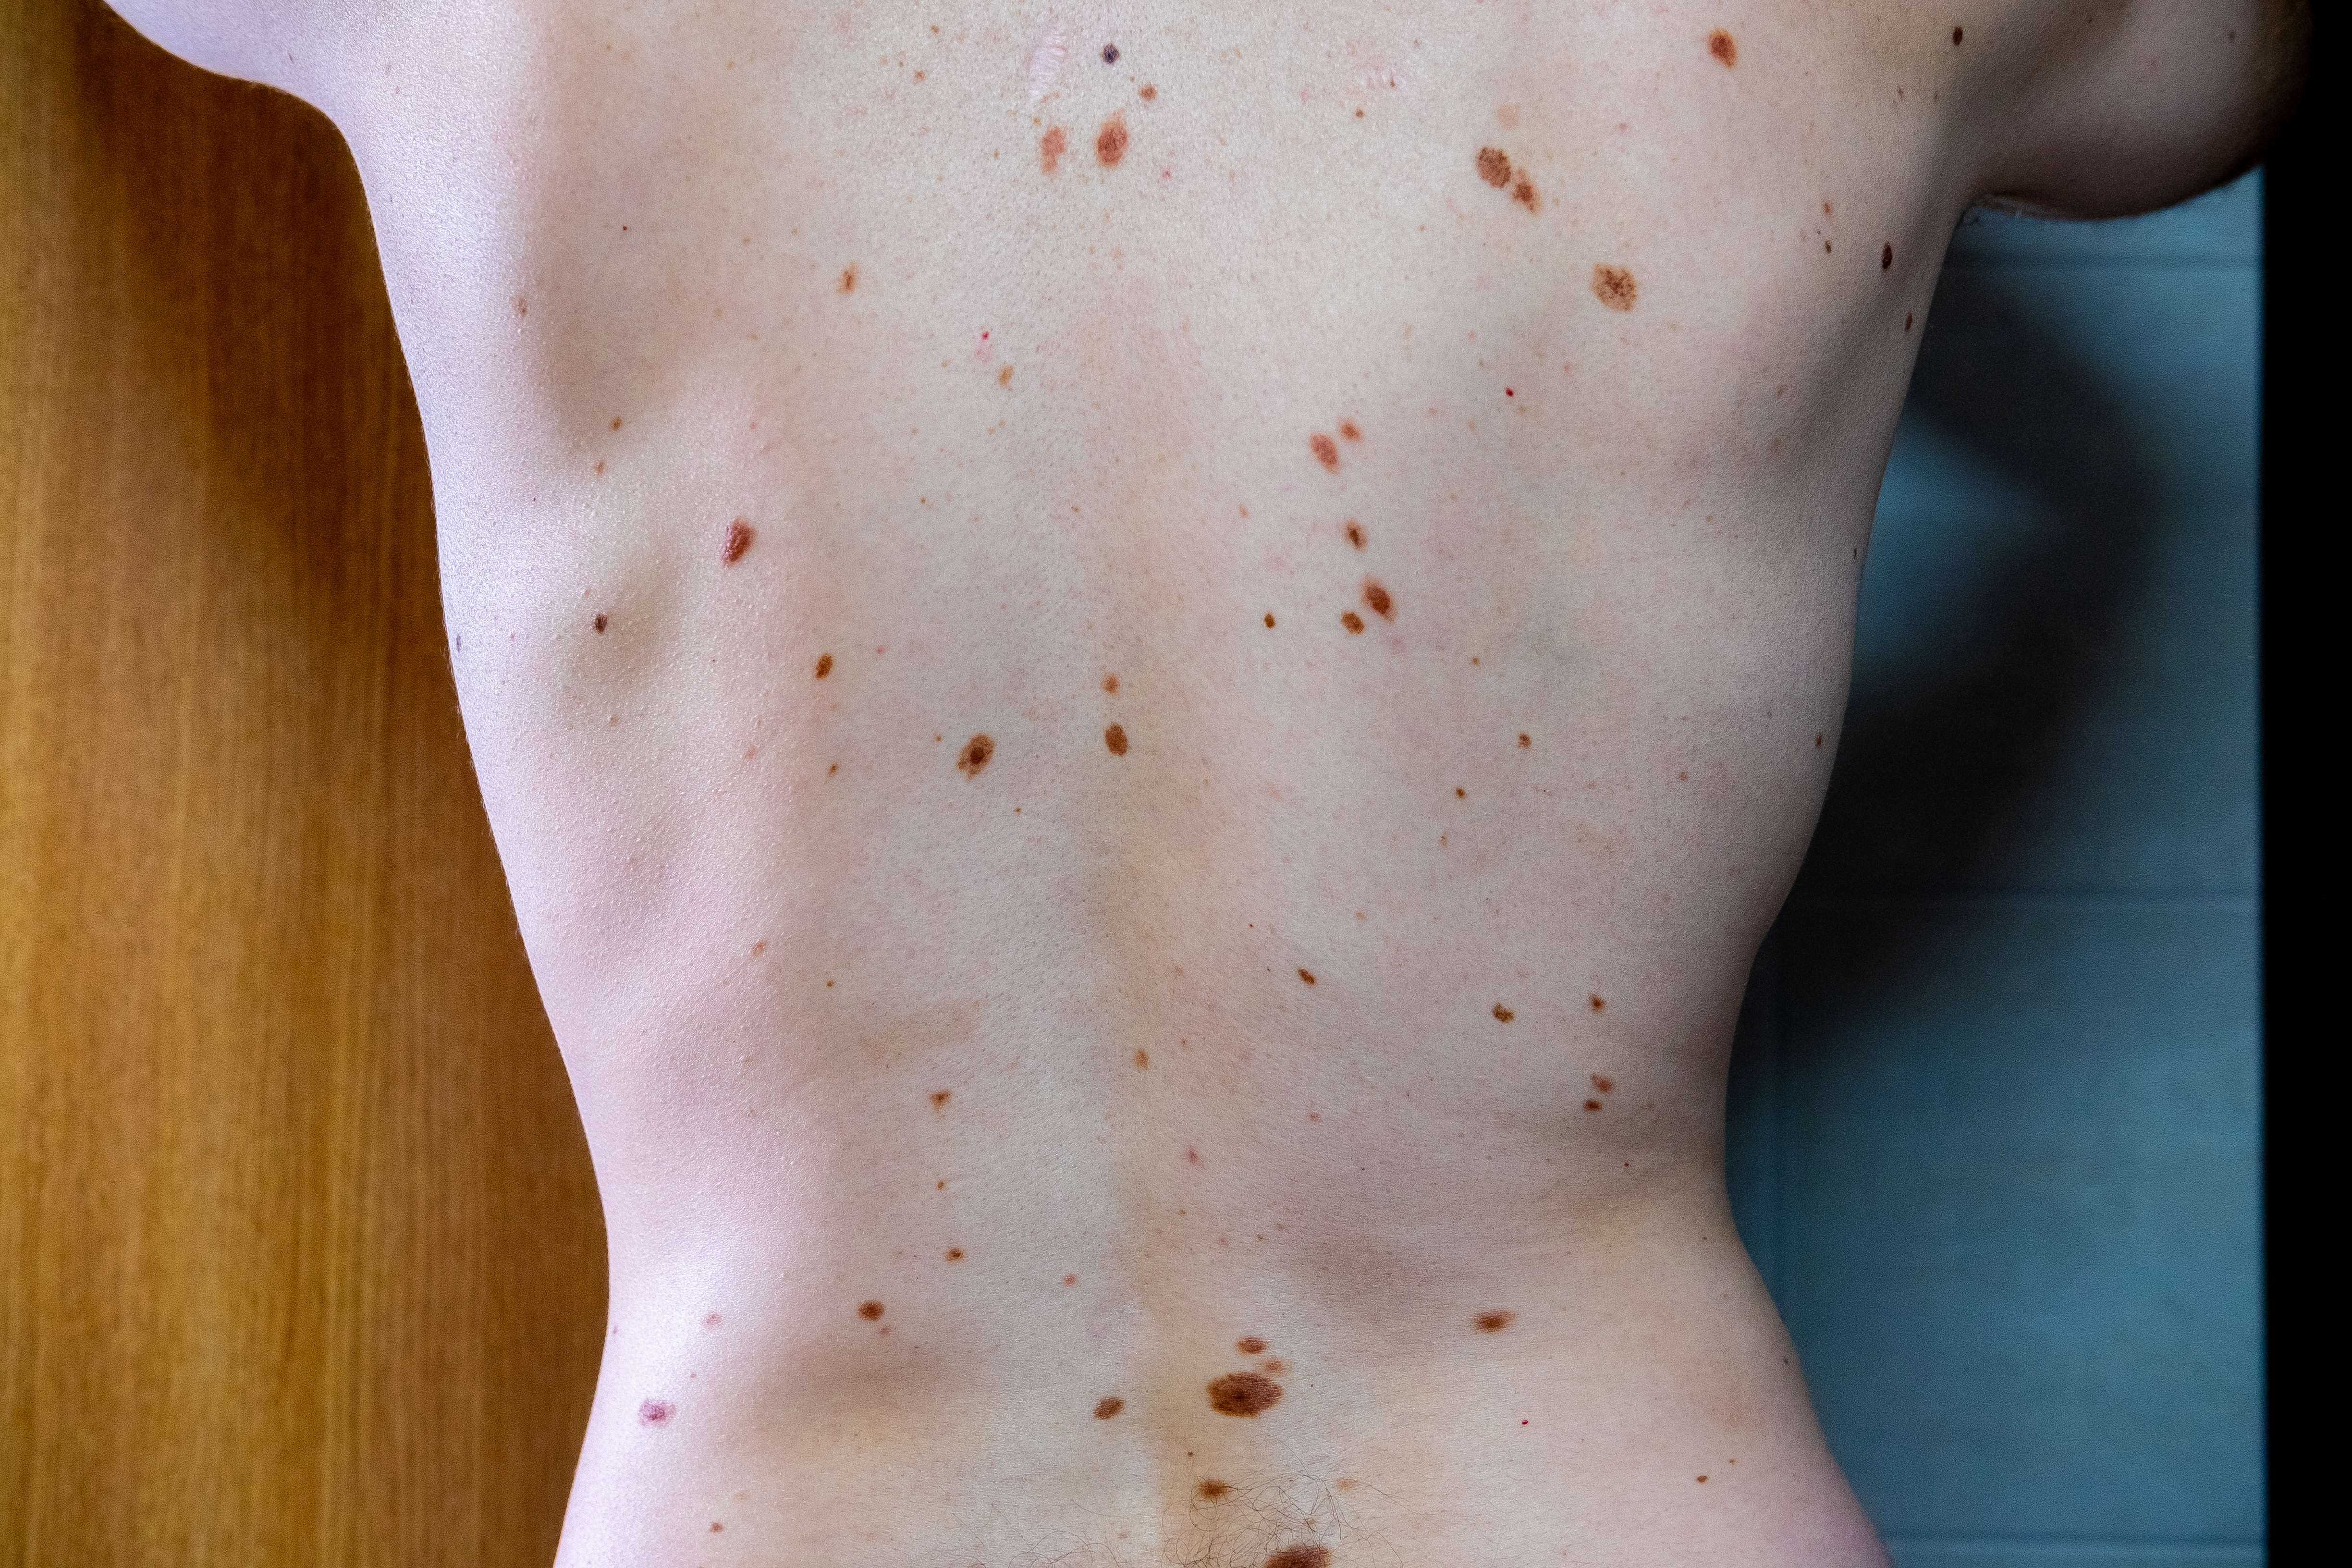 How Are Hundreds of Moles Removed All At Once?